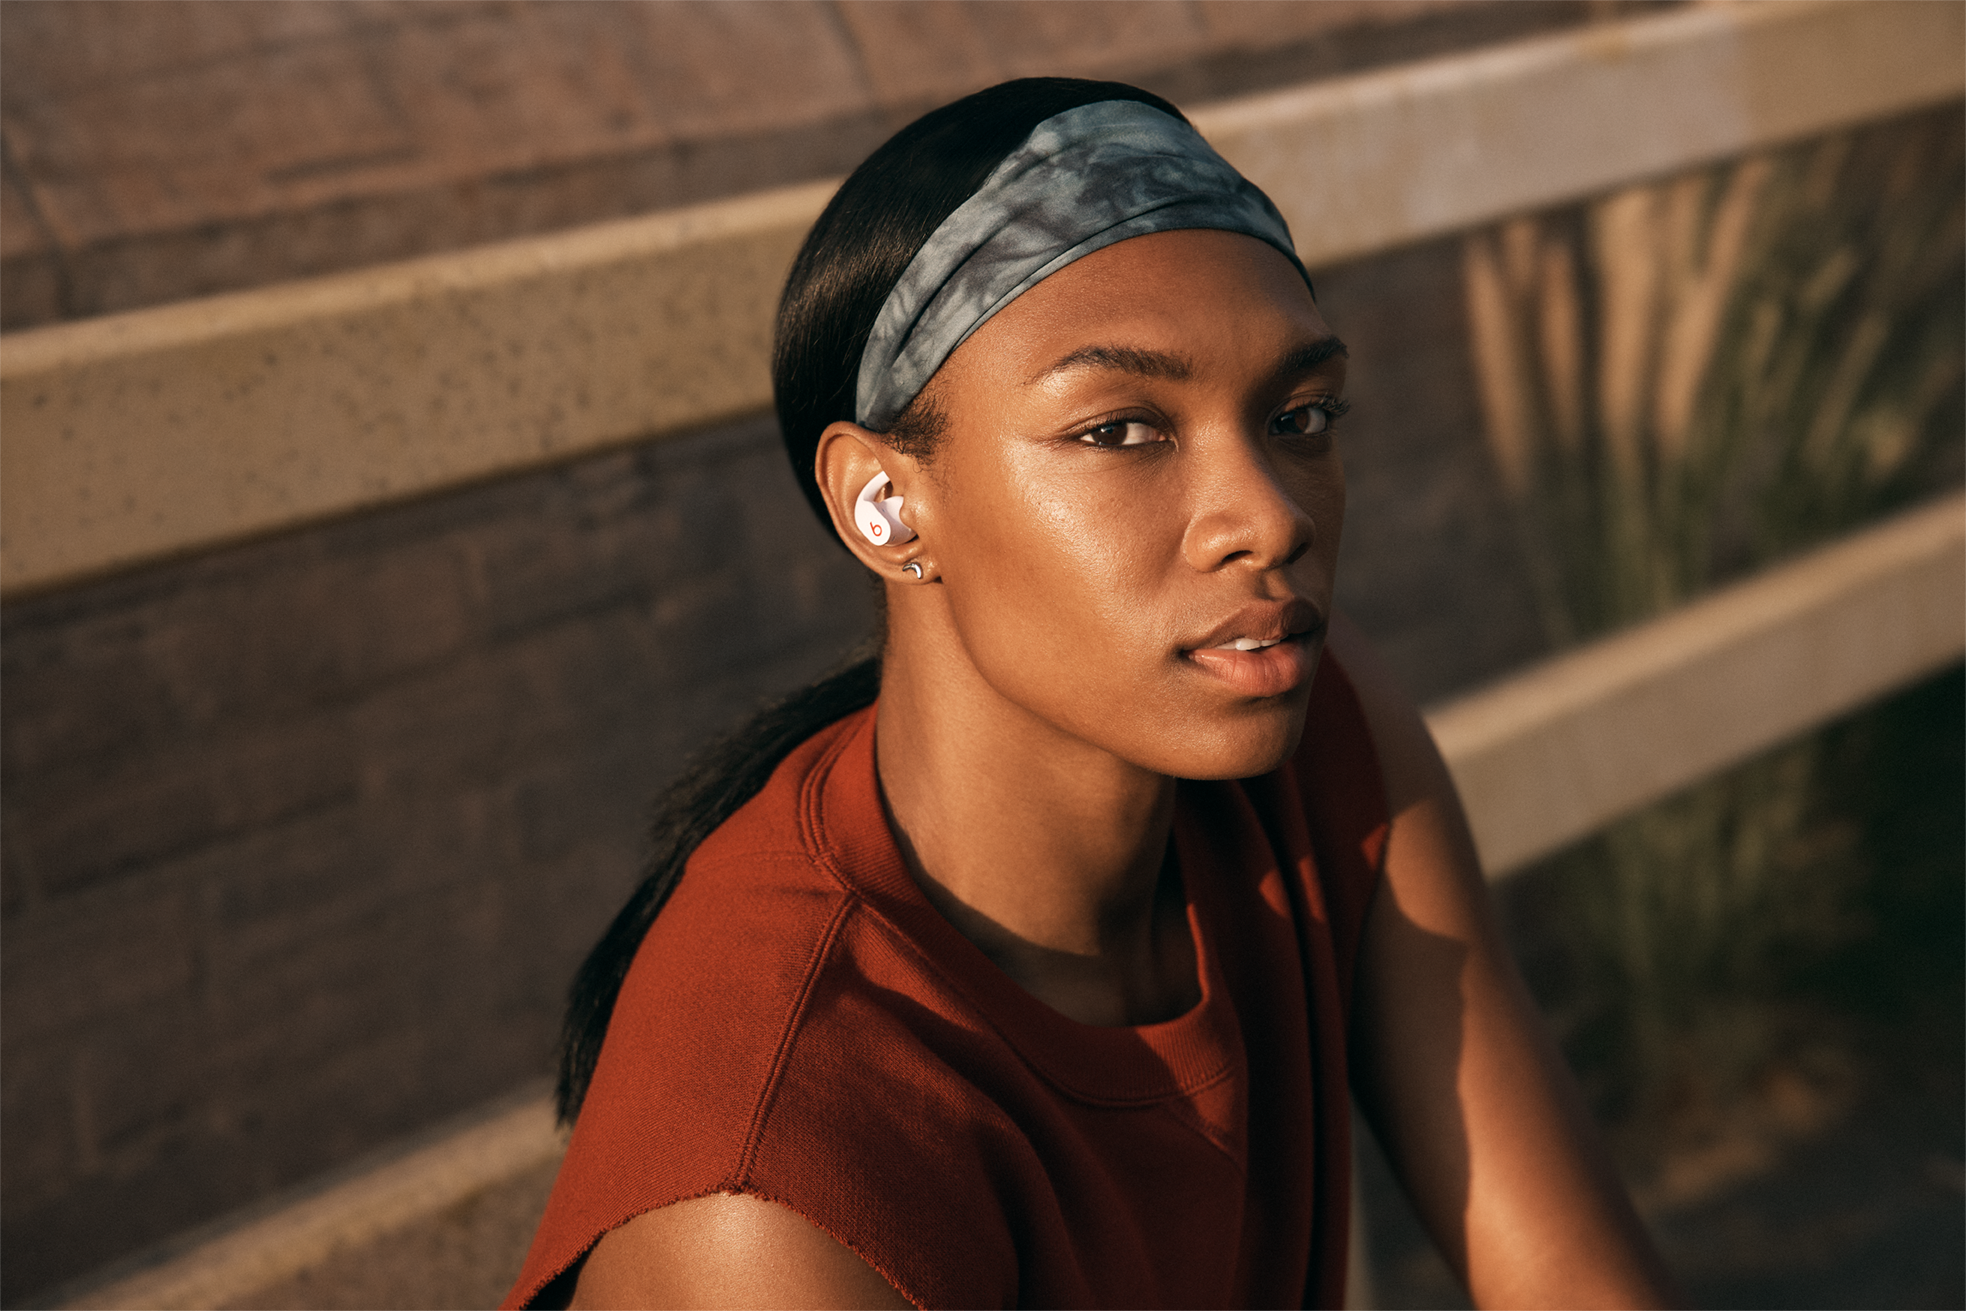 Beats Just Released Their Best Fitness Earphones Yet, But You Don't Have To Work Out To Appreciate Them